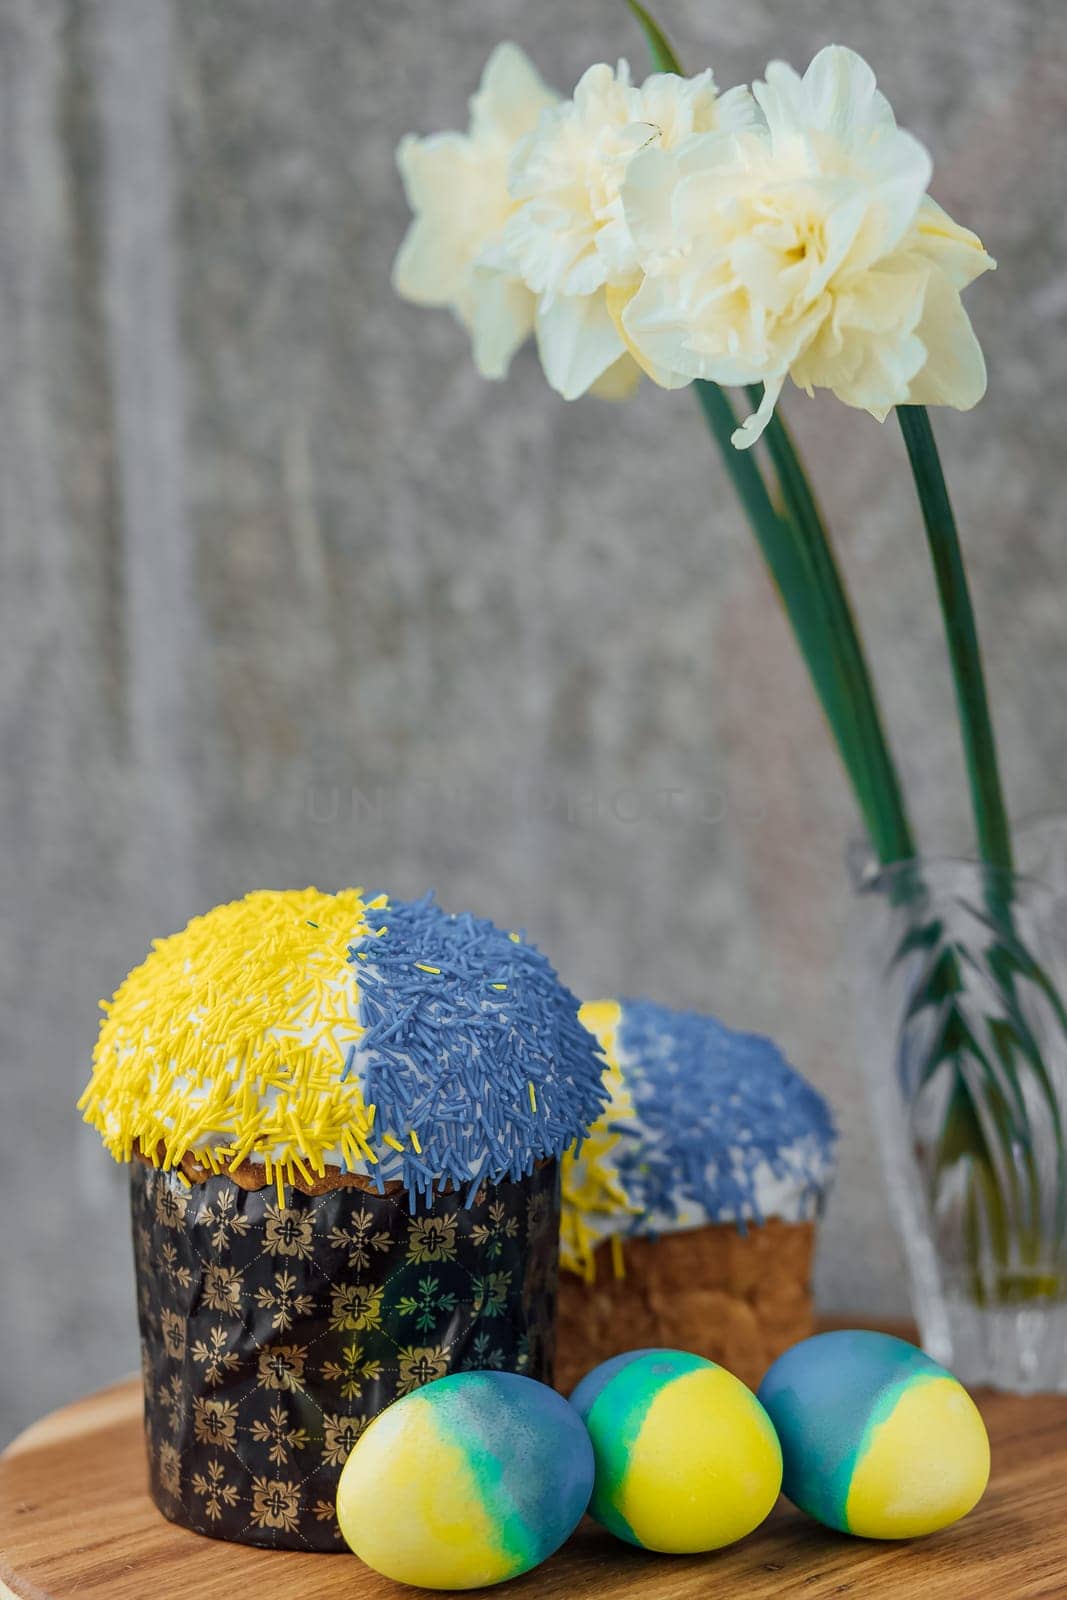 Delicious Easter cakes in the colors of the flag of Ukraine, yellow-blue colored Easter eggs on a wooden table with flowers in the background. place for text. selective focus.